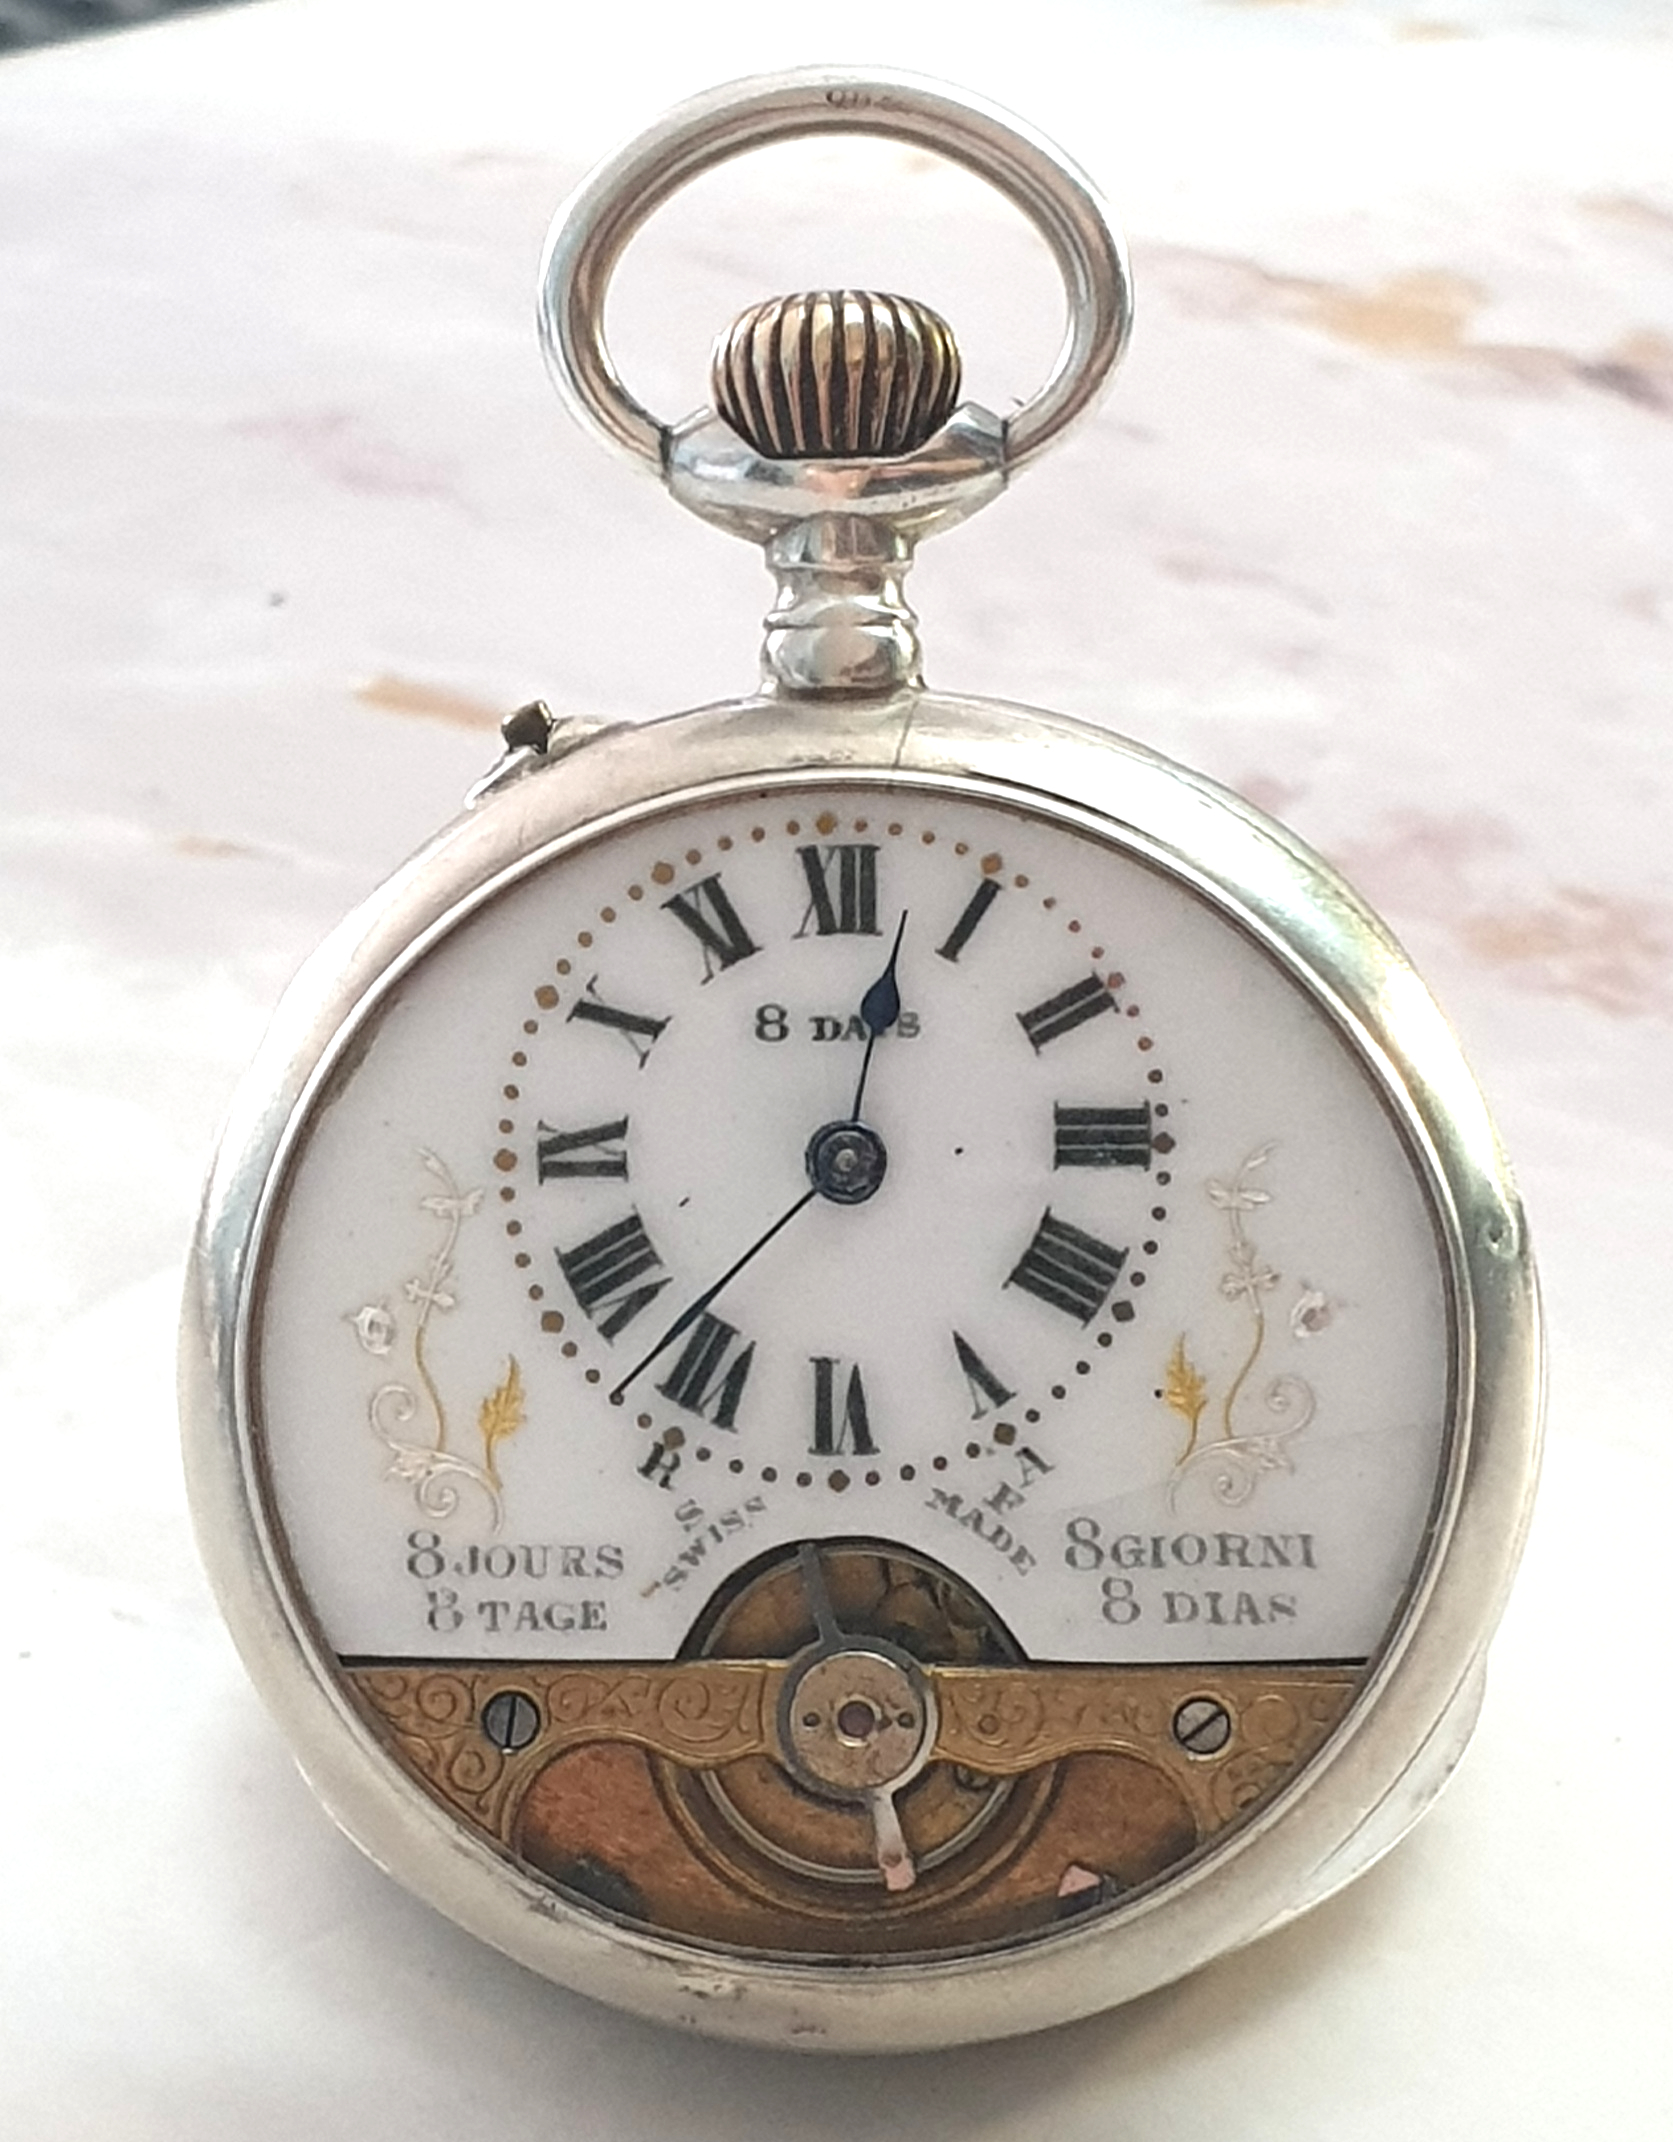 8 DAY HEBDOMAS TOP WIND POCKET WATCH WITH ENAMELLED DIAL AND VISIBLE ESCAPEMENT IN STERLING SILVER - Image 12 of 13